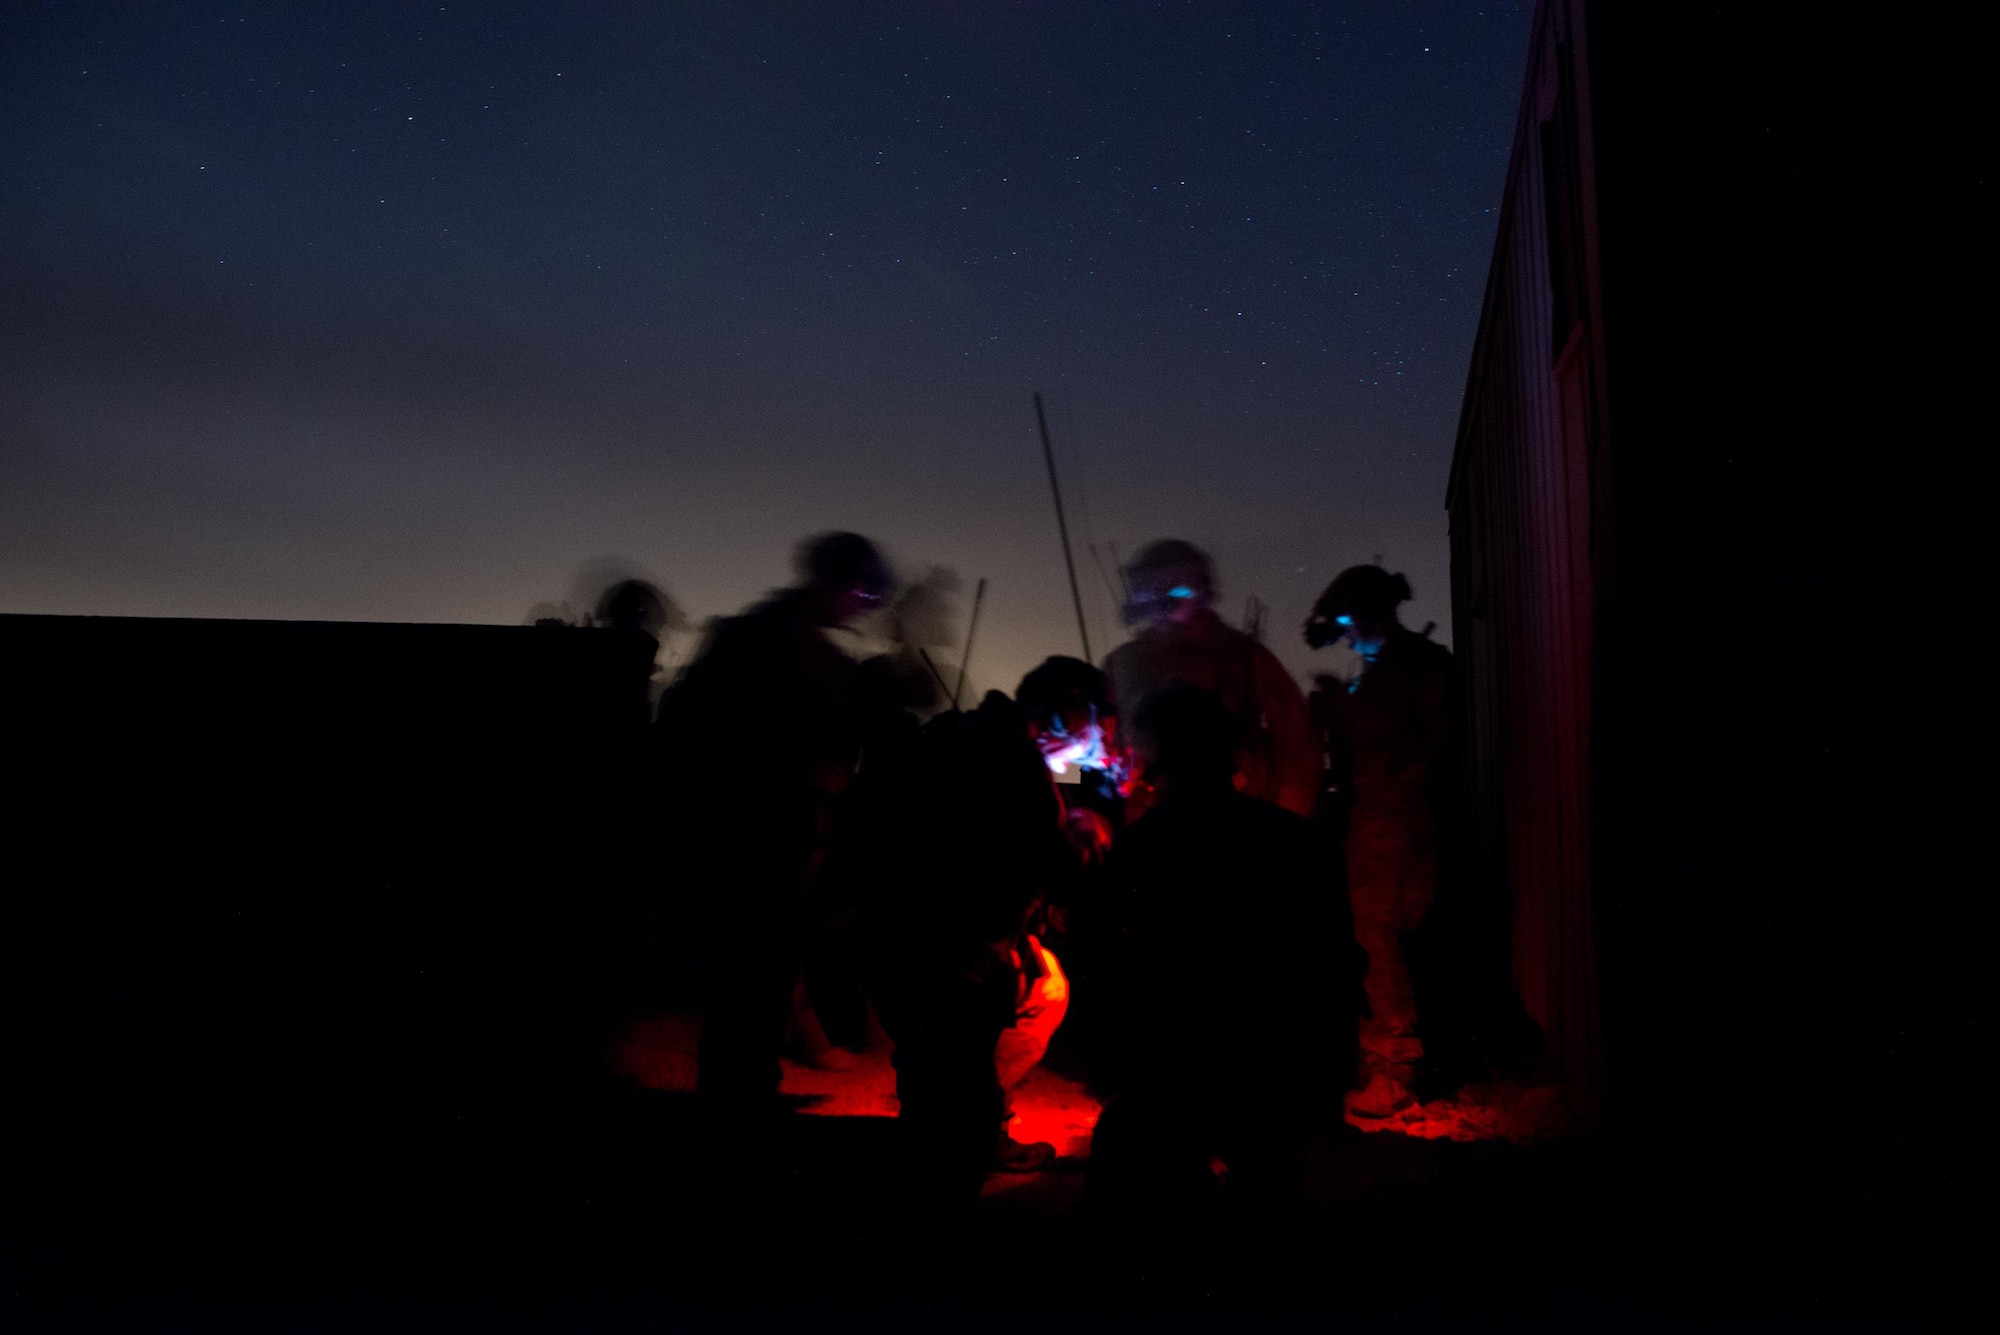 Special Tactics Airmen from the 123rd Special Tactics Squadron, Kentucky Air National Guard, maneuver through multiple training scenarios at Falcon Bombing Range, Fort Sill, Okla., March 23, 2017. The 137th Air Support Element from the 137th Special Operations Wing, Oklahoma City, coordinated a joint training event with the 123rd Special Tactics Squadron, Kentucky Air National Guard, Air Force Reserve F-16 Fighting Falcons from the 301st Fighter Wing and T-38 Talons from the 88th Fighter Training Squadron, Sheppard Air Force Base, March 20-23, 2017. (U.S. Air National Guard photo by Senior Master Sgt. Andrew M. LaMoreaux/Released)